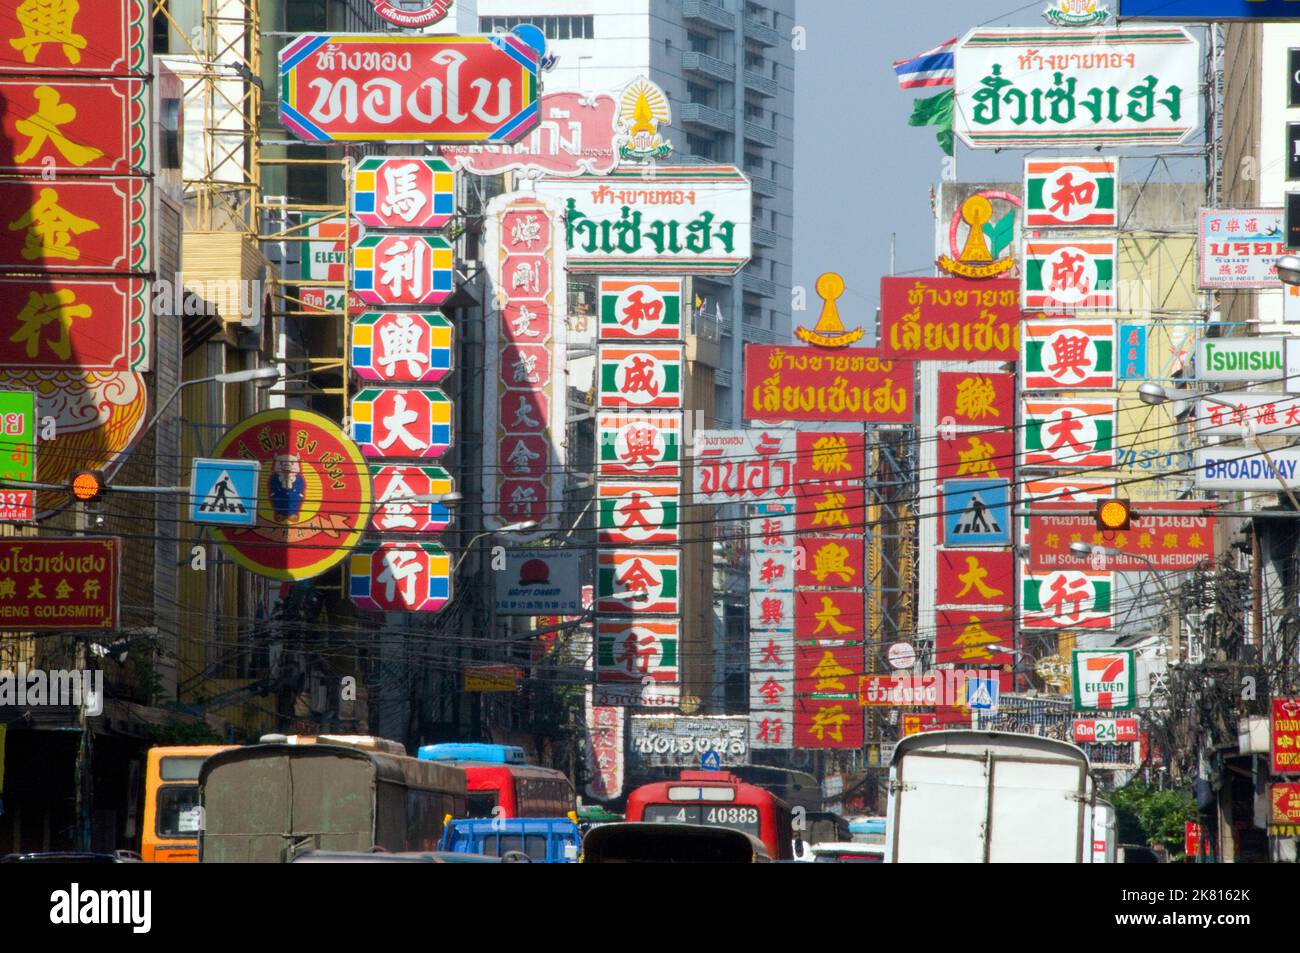 Thailand: Traffic and signs on Yaowarat Road, Chinatown, Bangkok (2008). Bangkok's Chinatown is one of the largest Chinatowns in the world. It was founded in 1782 when the city was established as the capital of the Rattanakosin Kingdom, and served as the home of the mainly Teochew immigrant Chinese population, who soon became the city's dominant ethnic group. Stock Photo